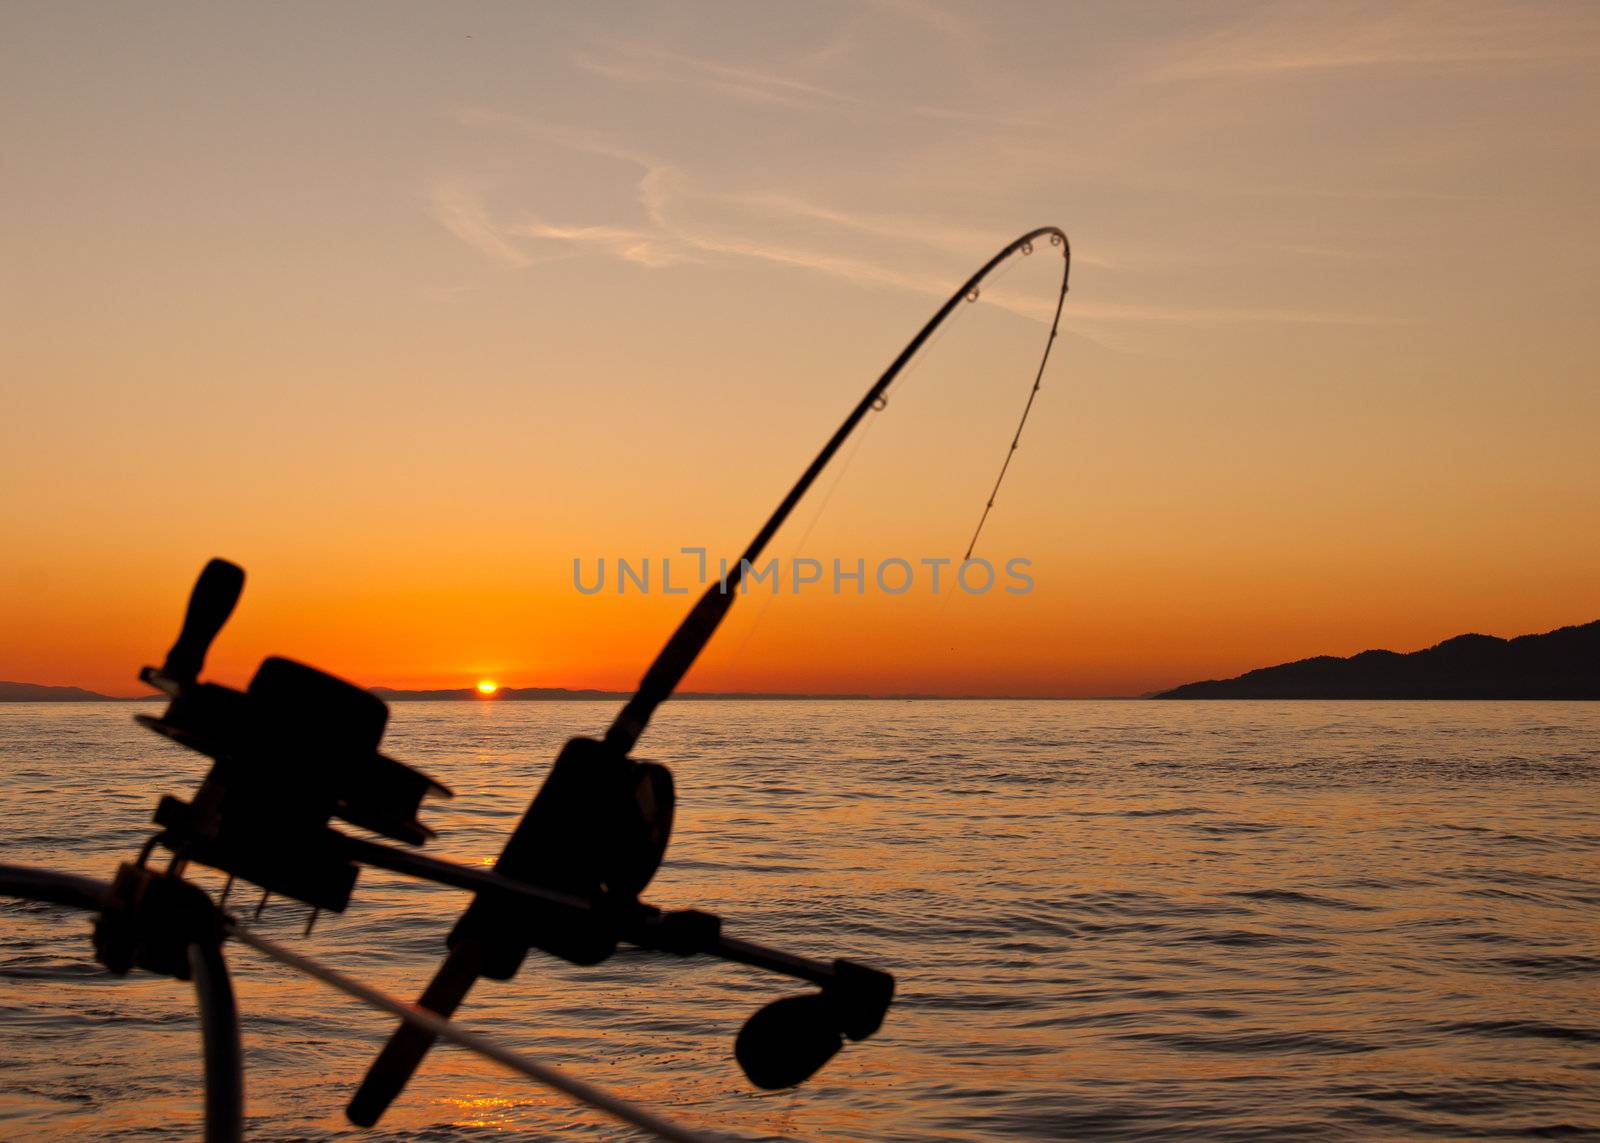 Taken just off the coast of Vancouver Island the silhouette of a down rigging fishing rod at sunset.